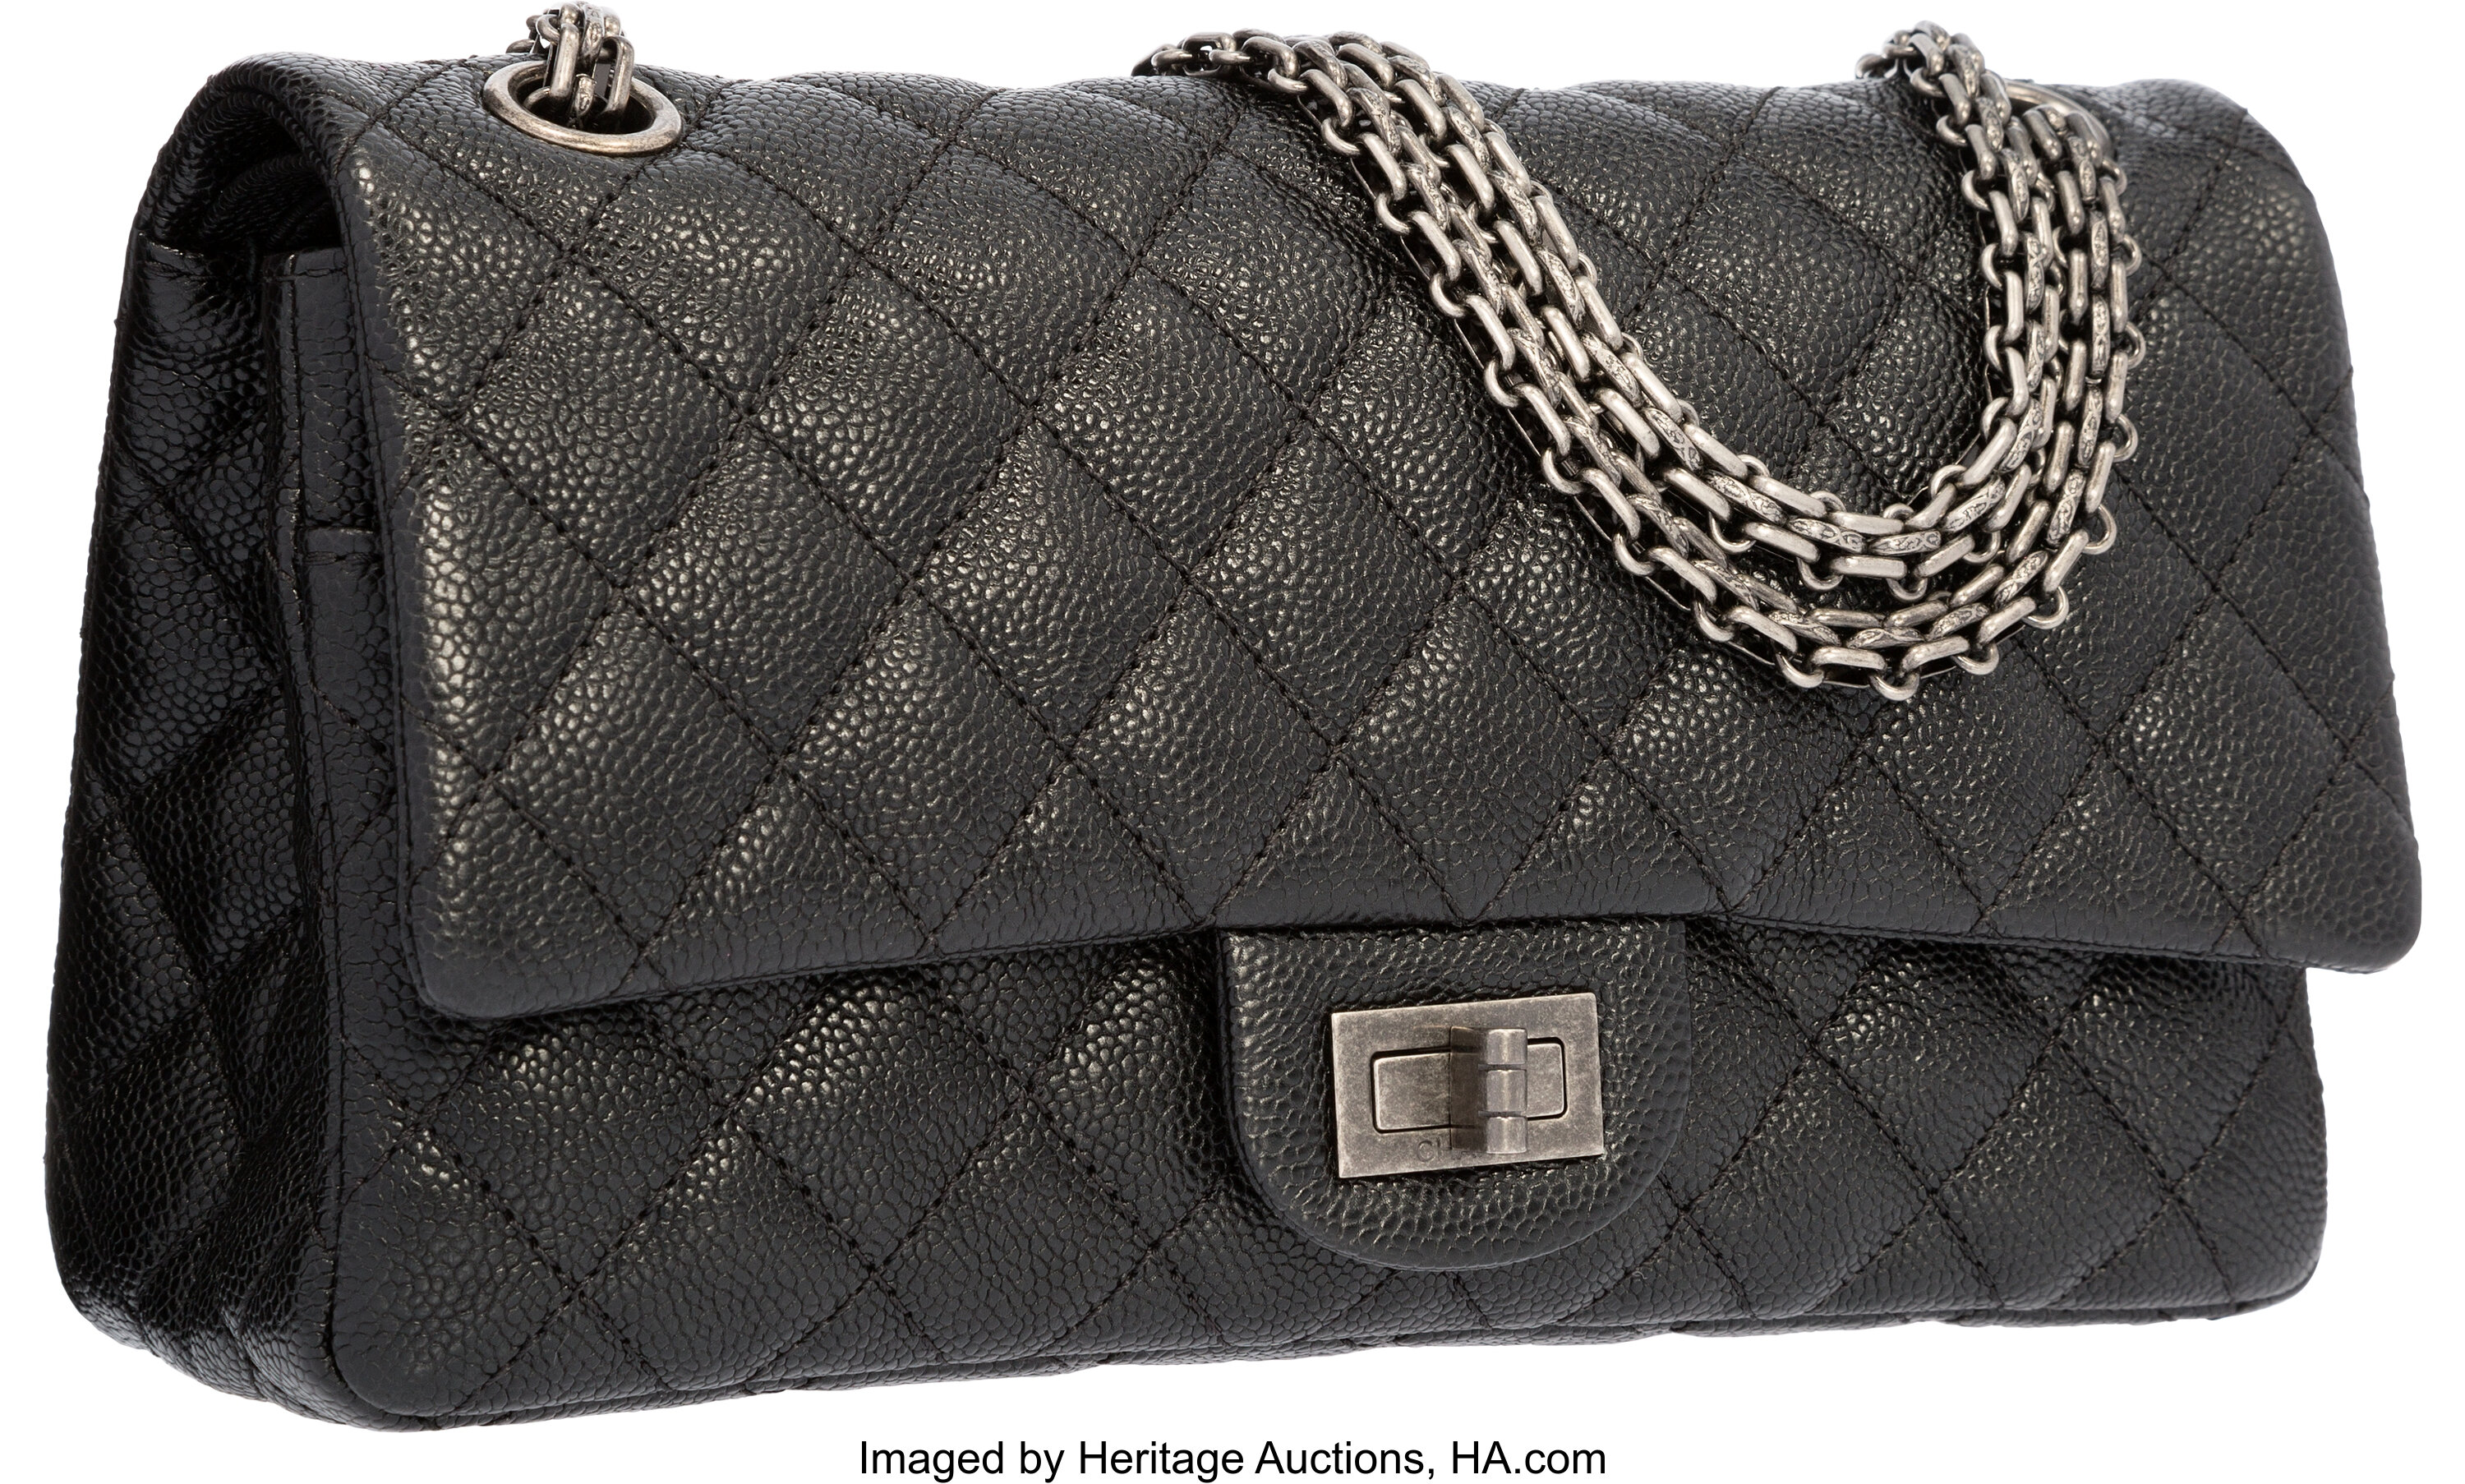 Sold at Auction: Chanel Black Caviar Leather Production Sample Bag